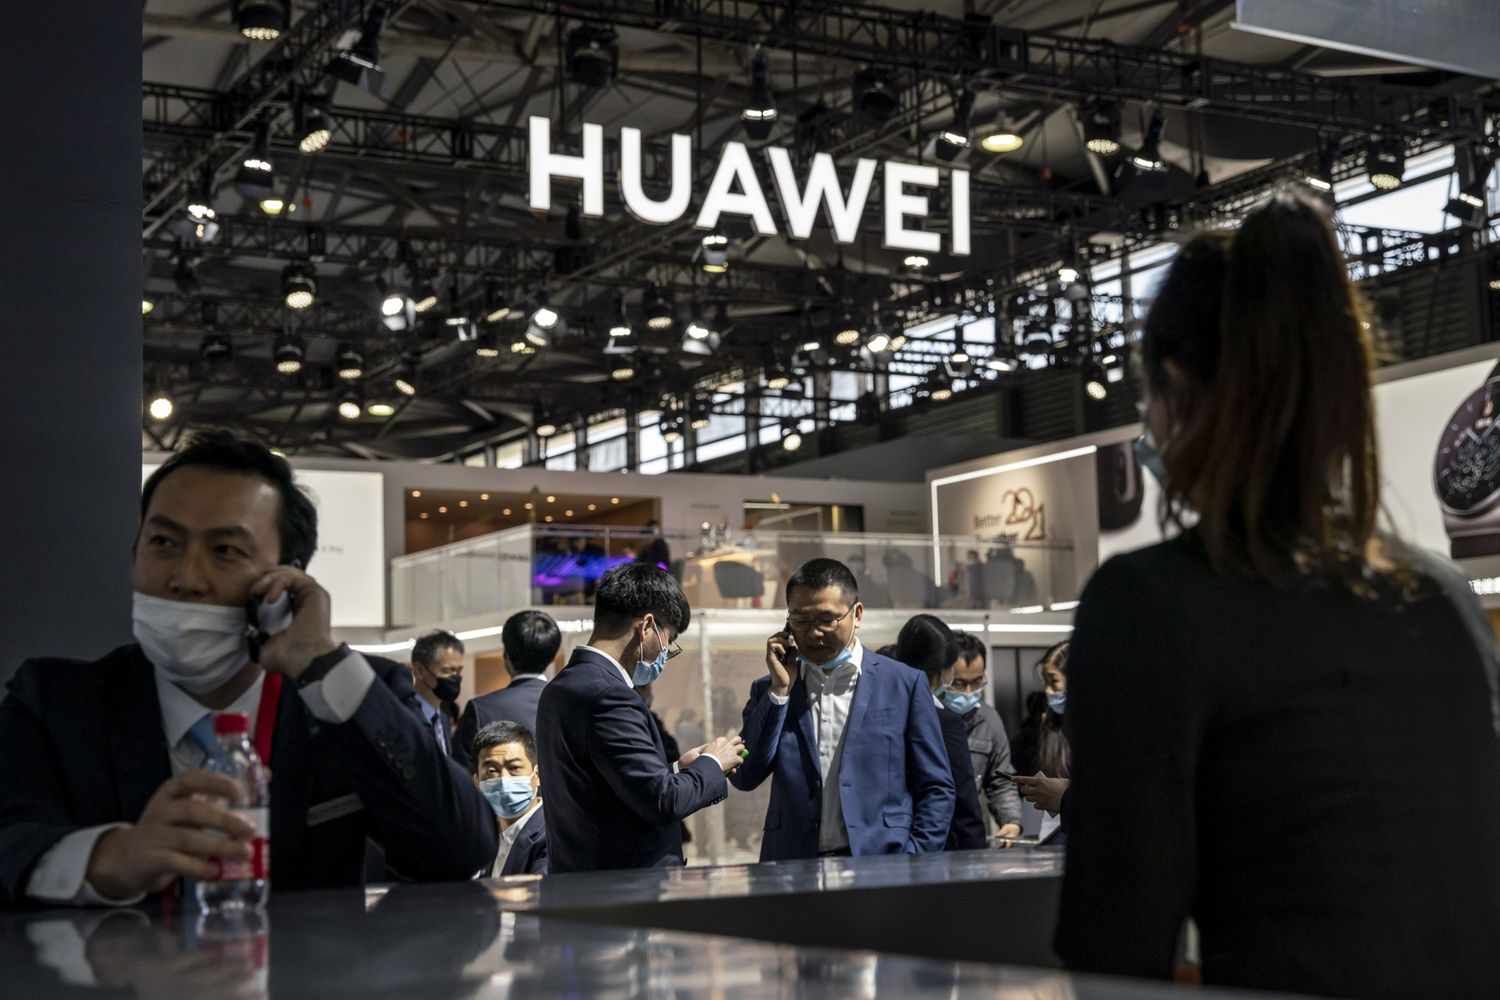 huawei-is-reportedly-hosting-a-secret-hacker-meeting-in-germany